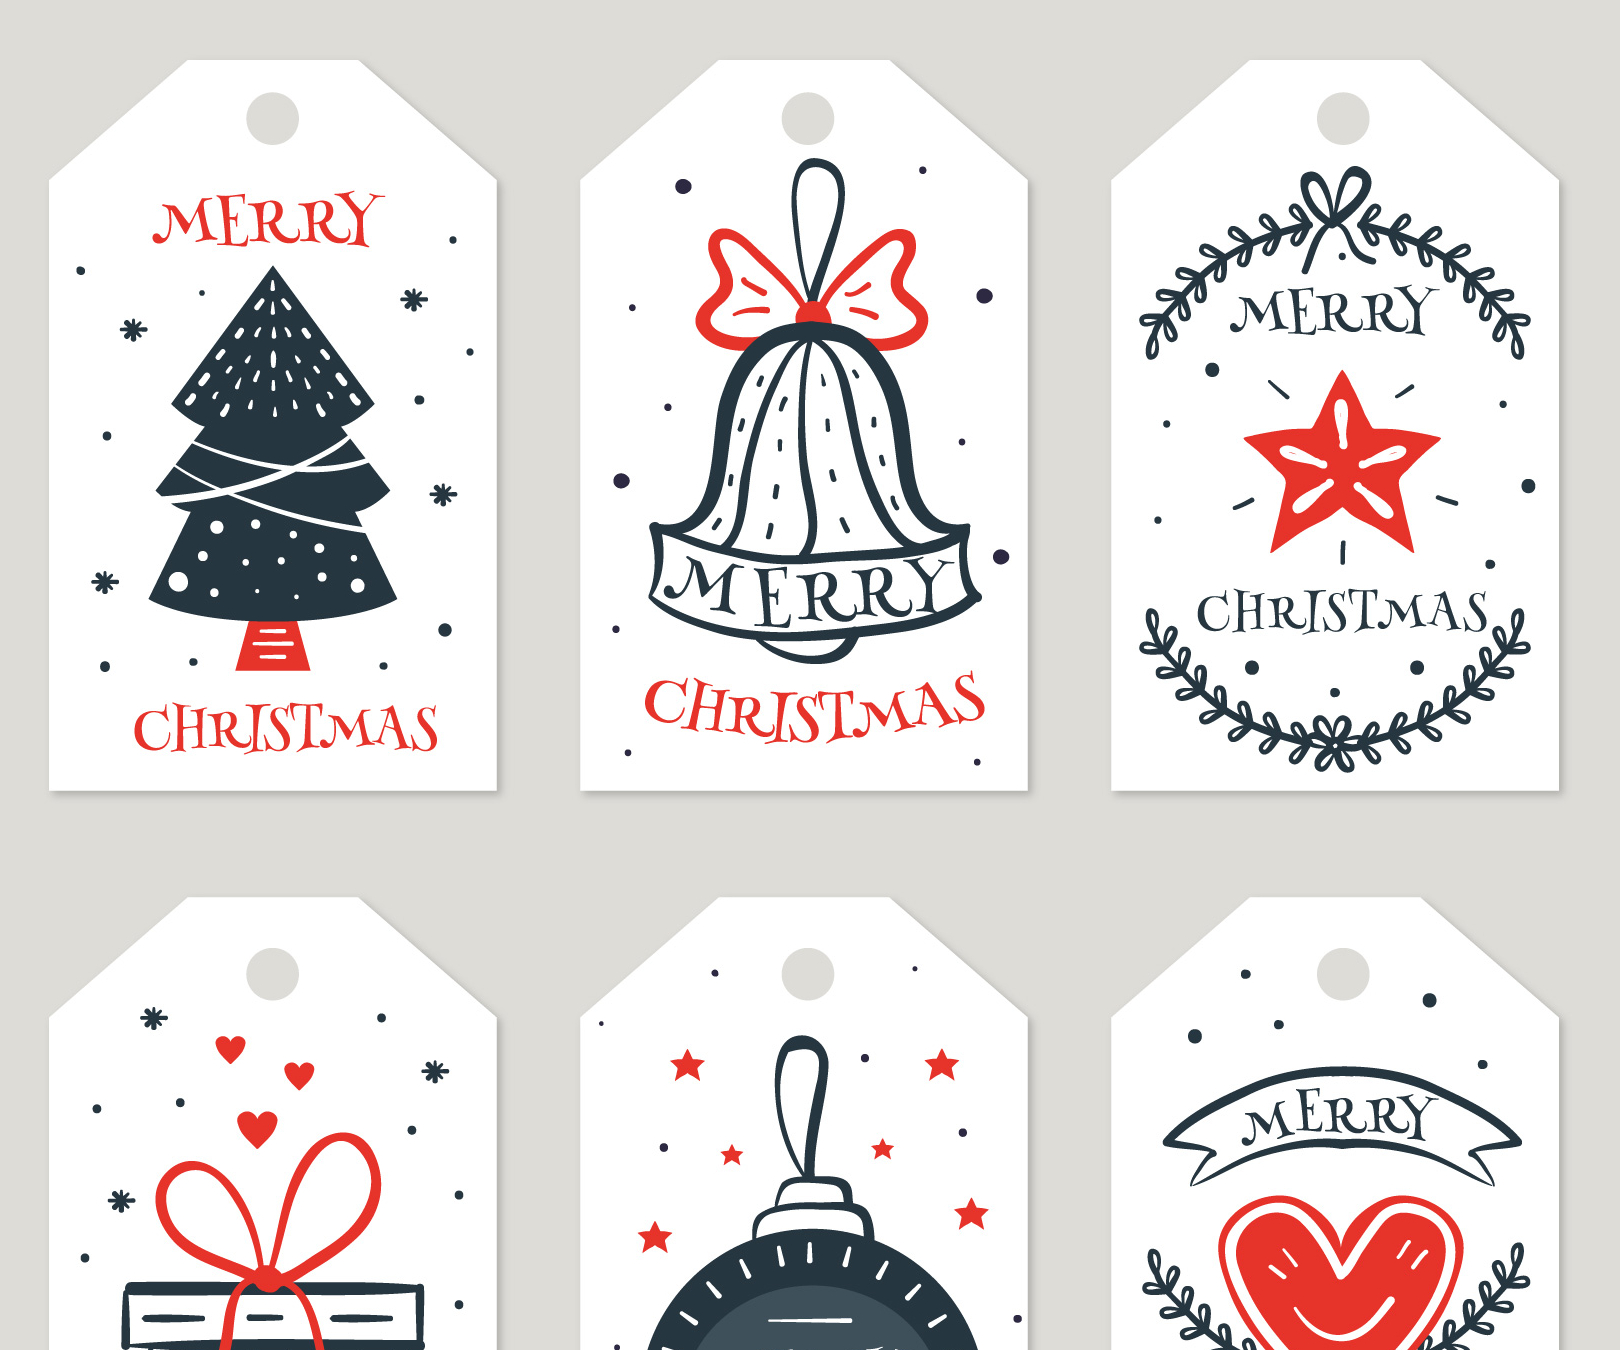 Create Gift Tags At Homeusing Microsoft® Word : 11 Steps Throughout Free Gift Tag Templates For Word